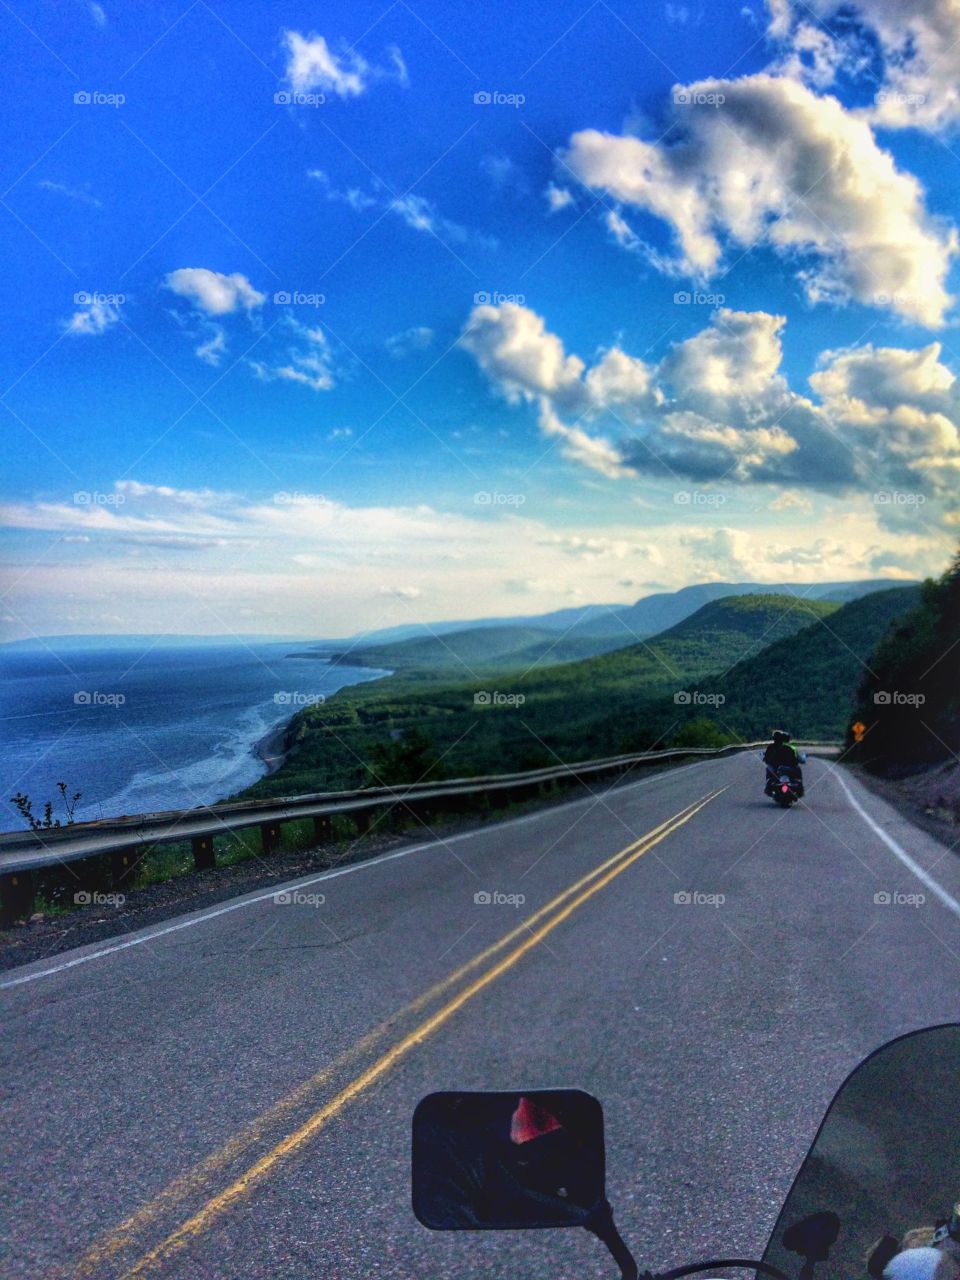 Heading home on the Cabot Trail